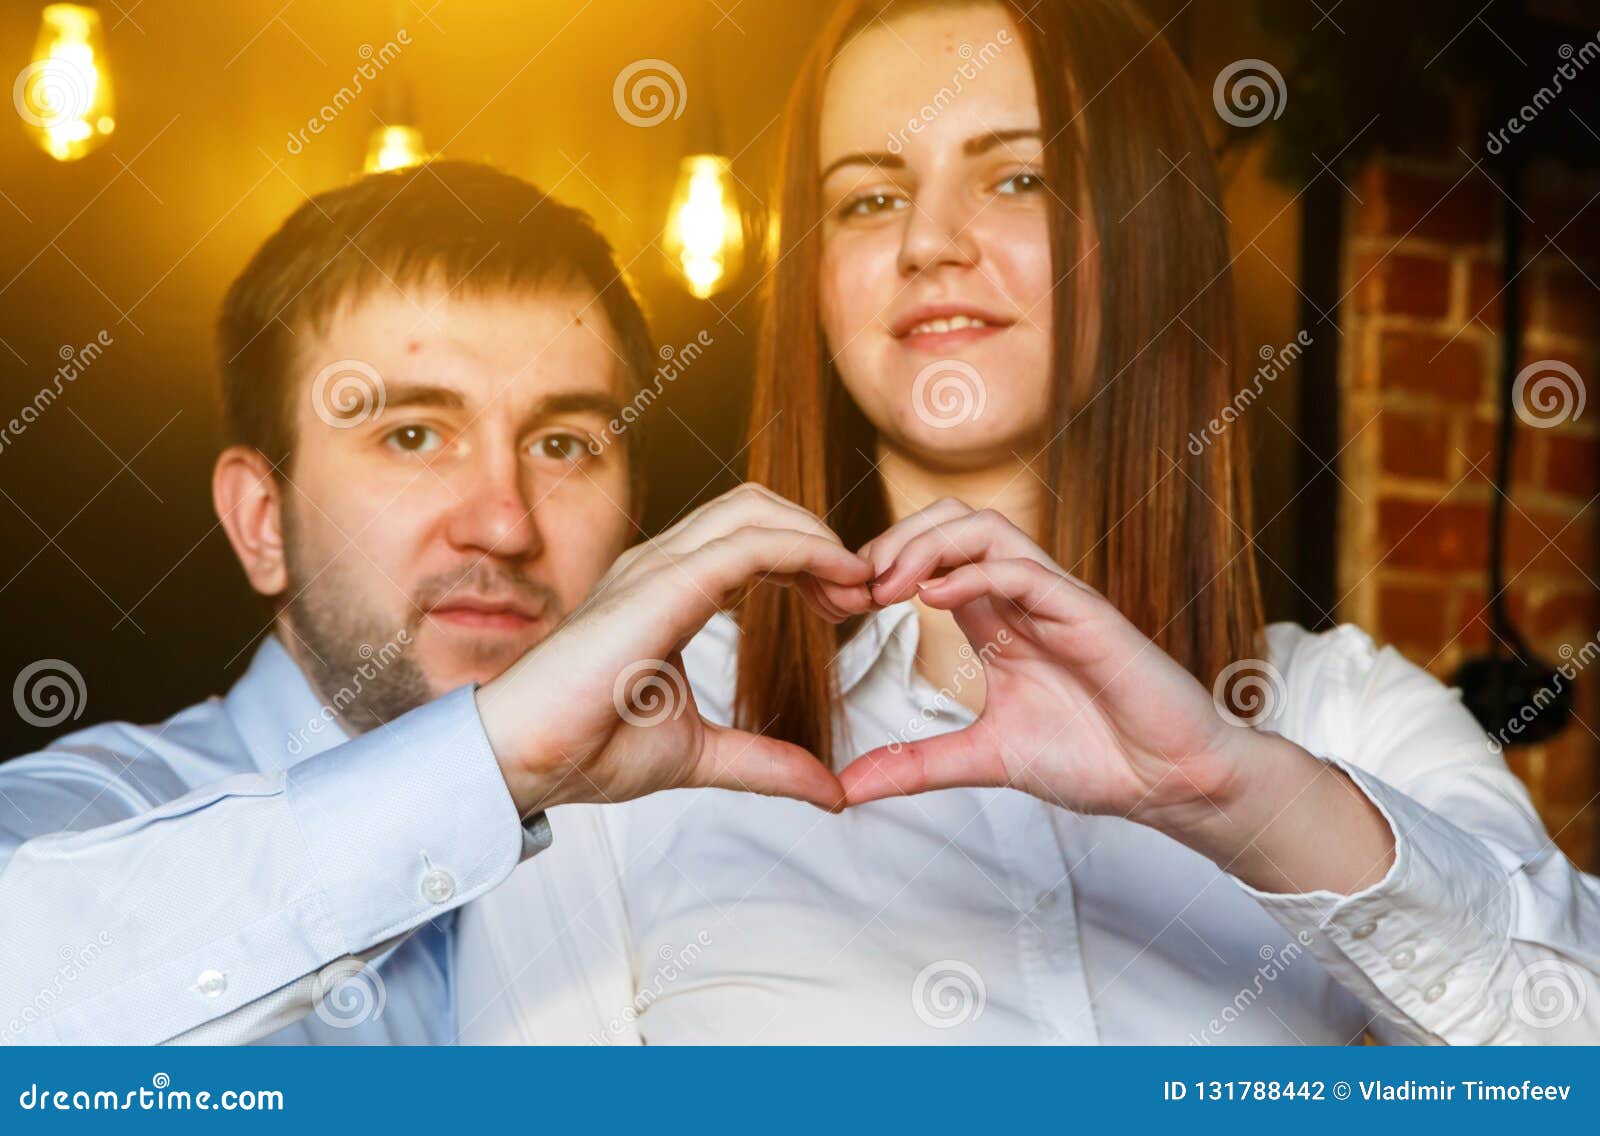 Happy couple in love showing heart with fingers in the loft interior, burning lights in the background